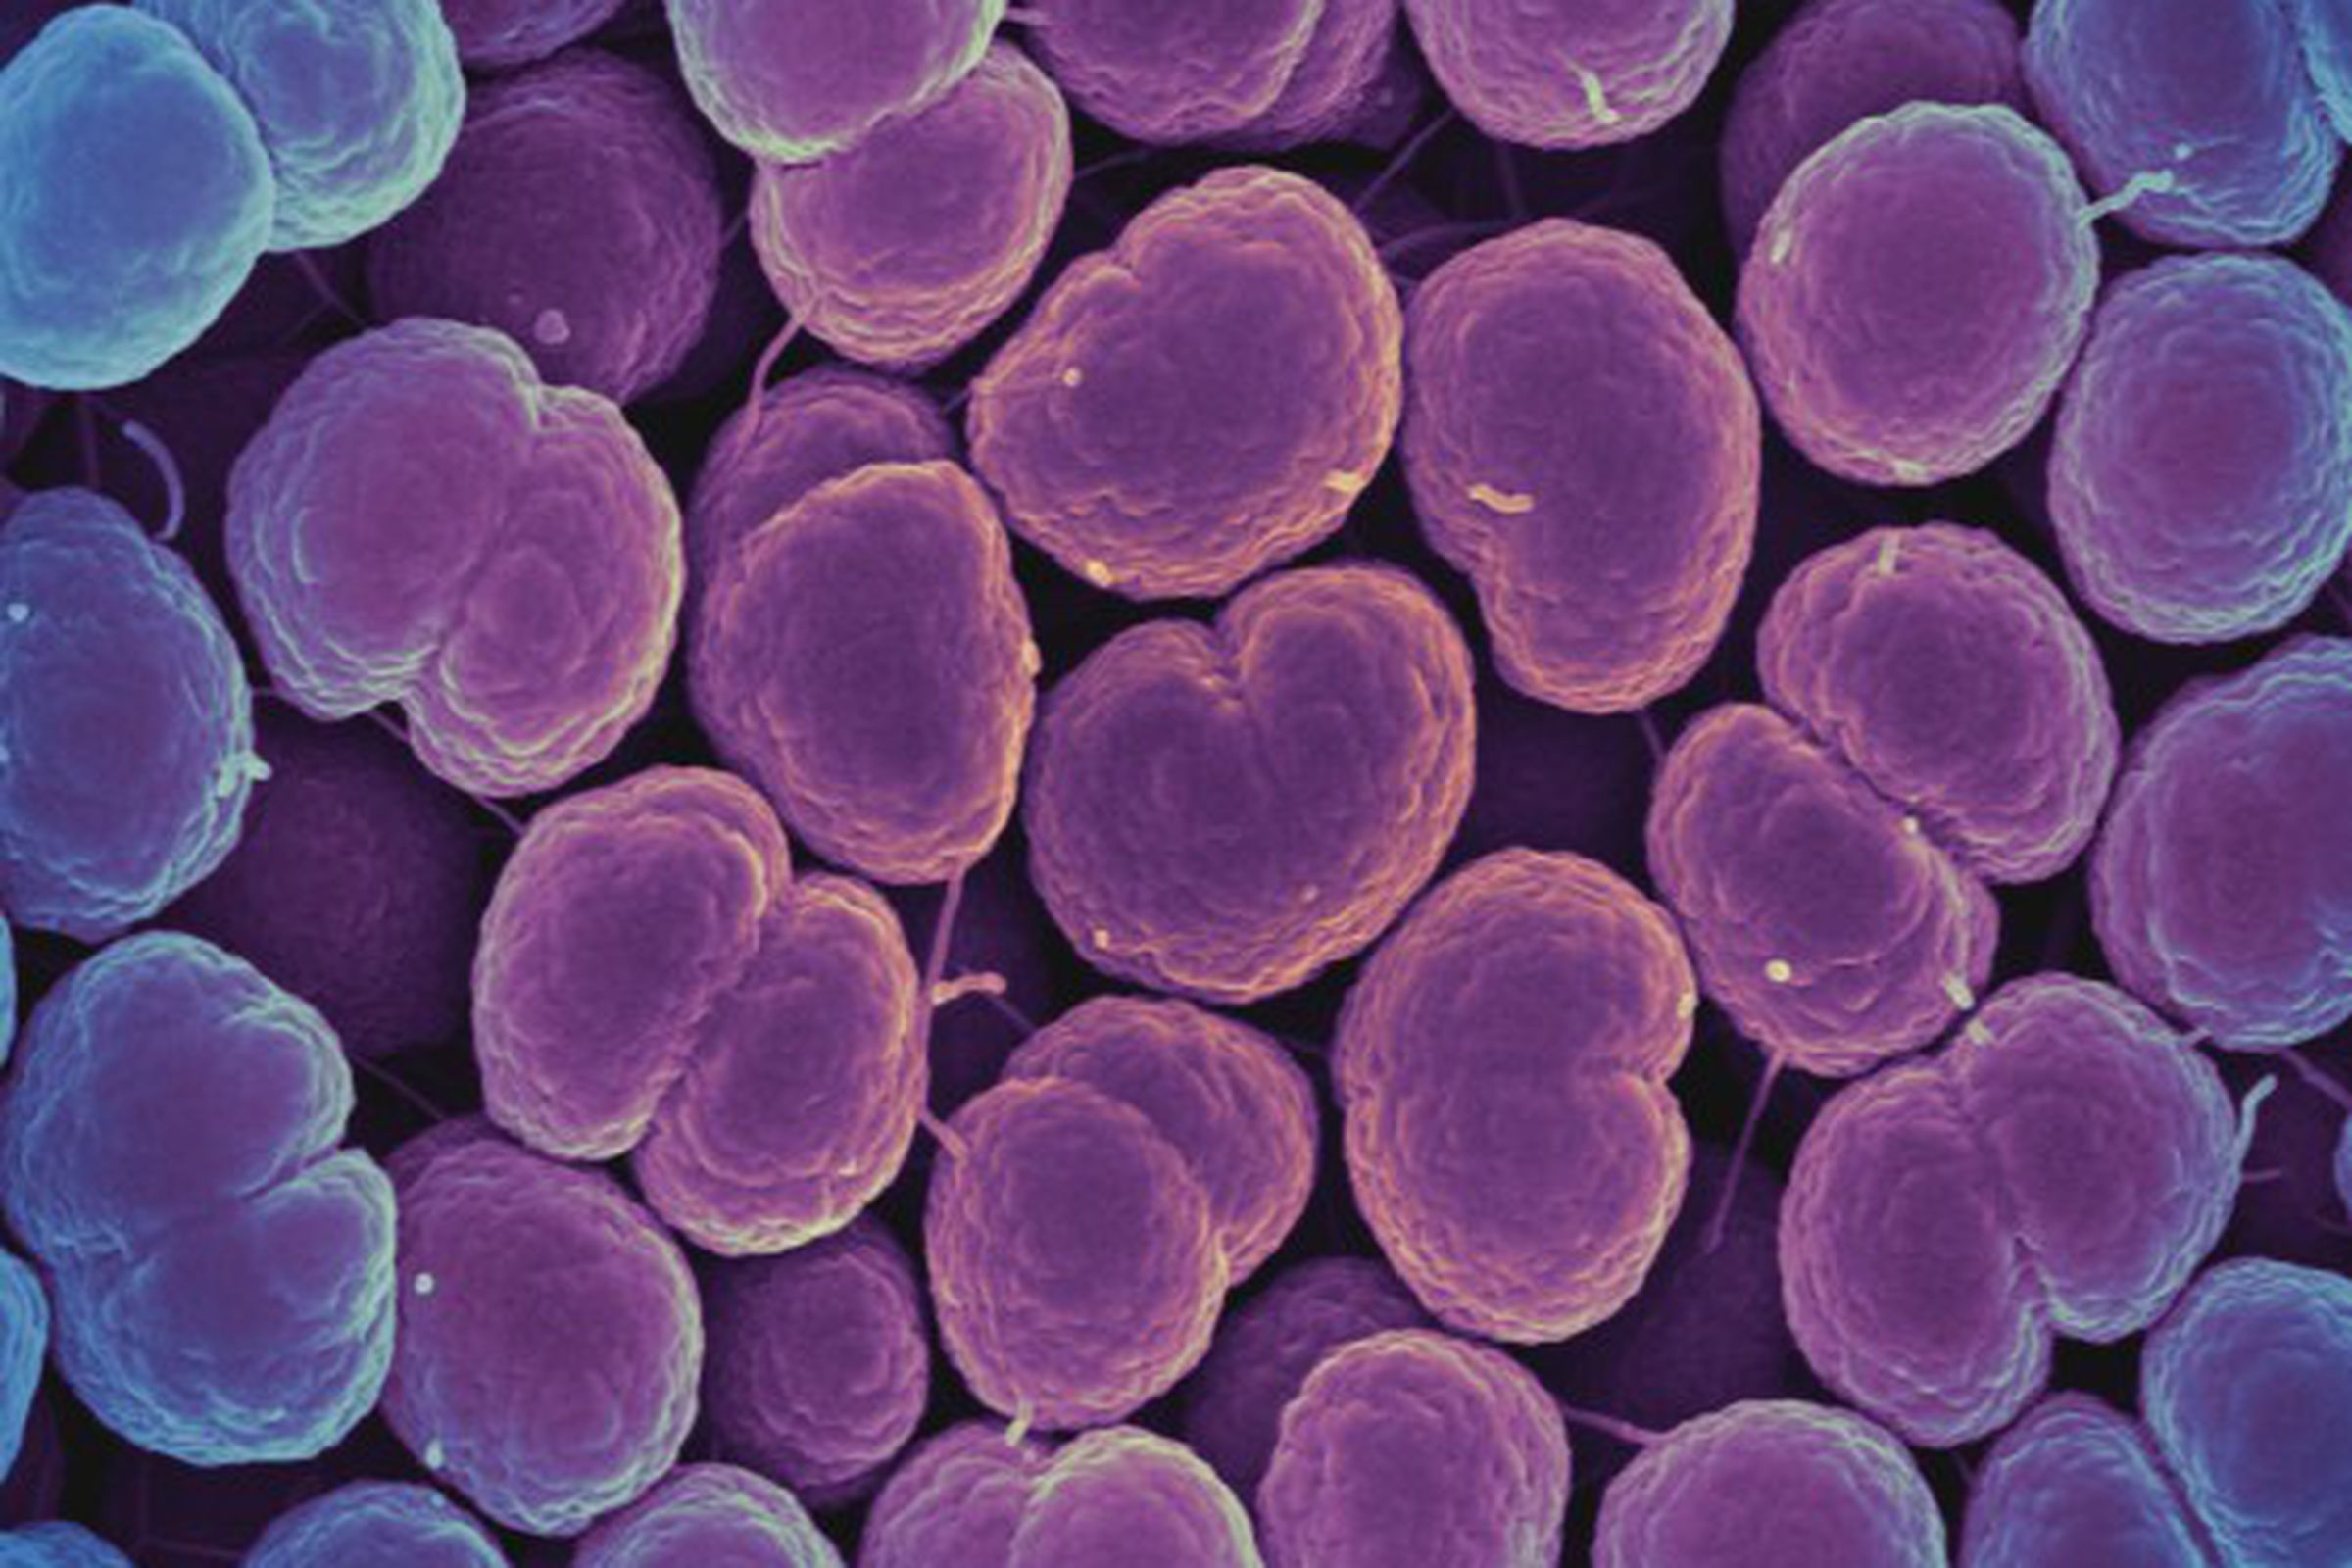 The Neisseria gonorrhoeae bacteria, which cause gonorrhea.